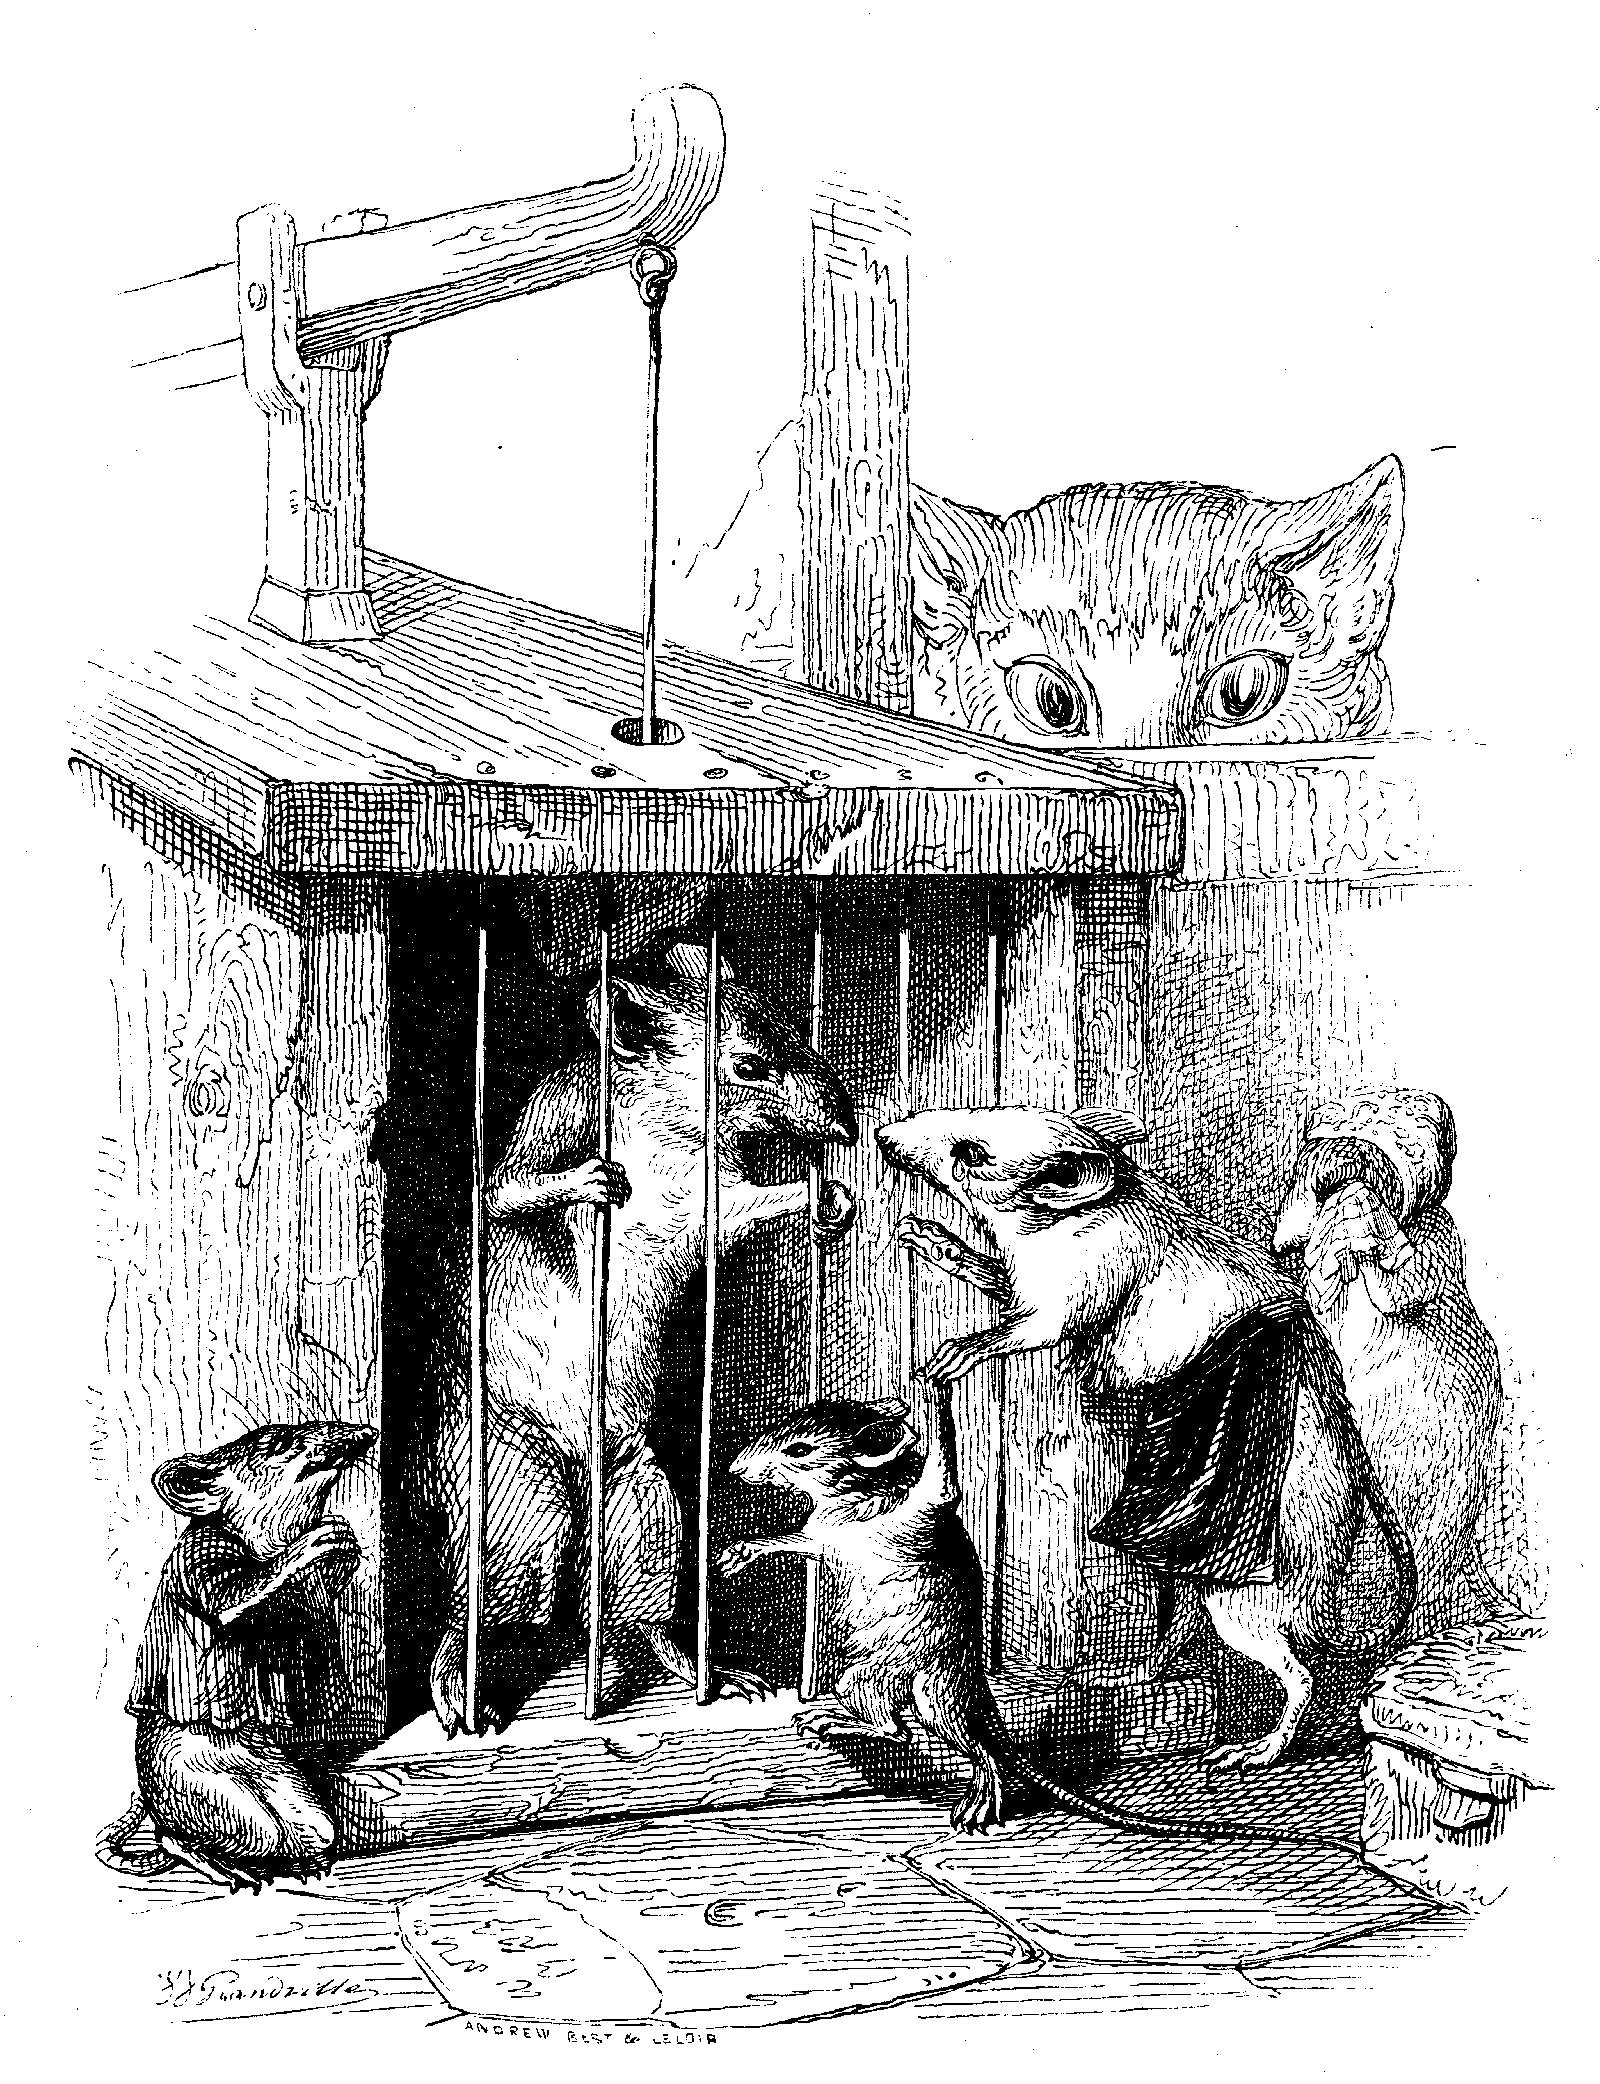 Drawing of a mouse in a cage